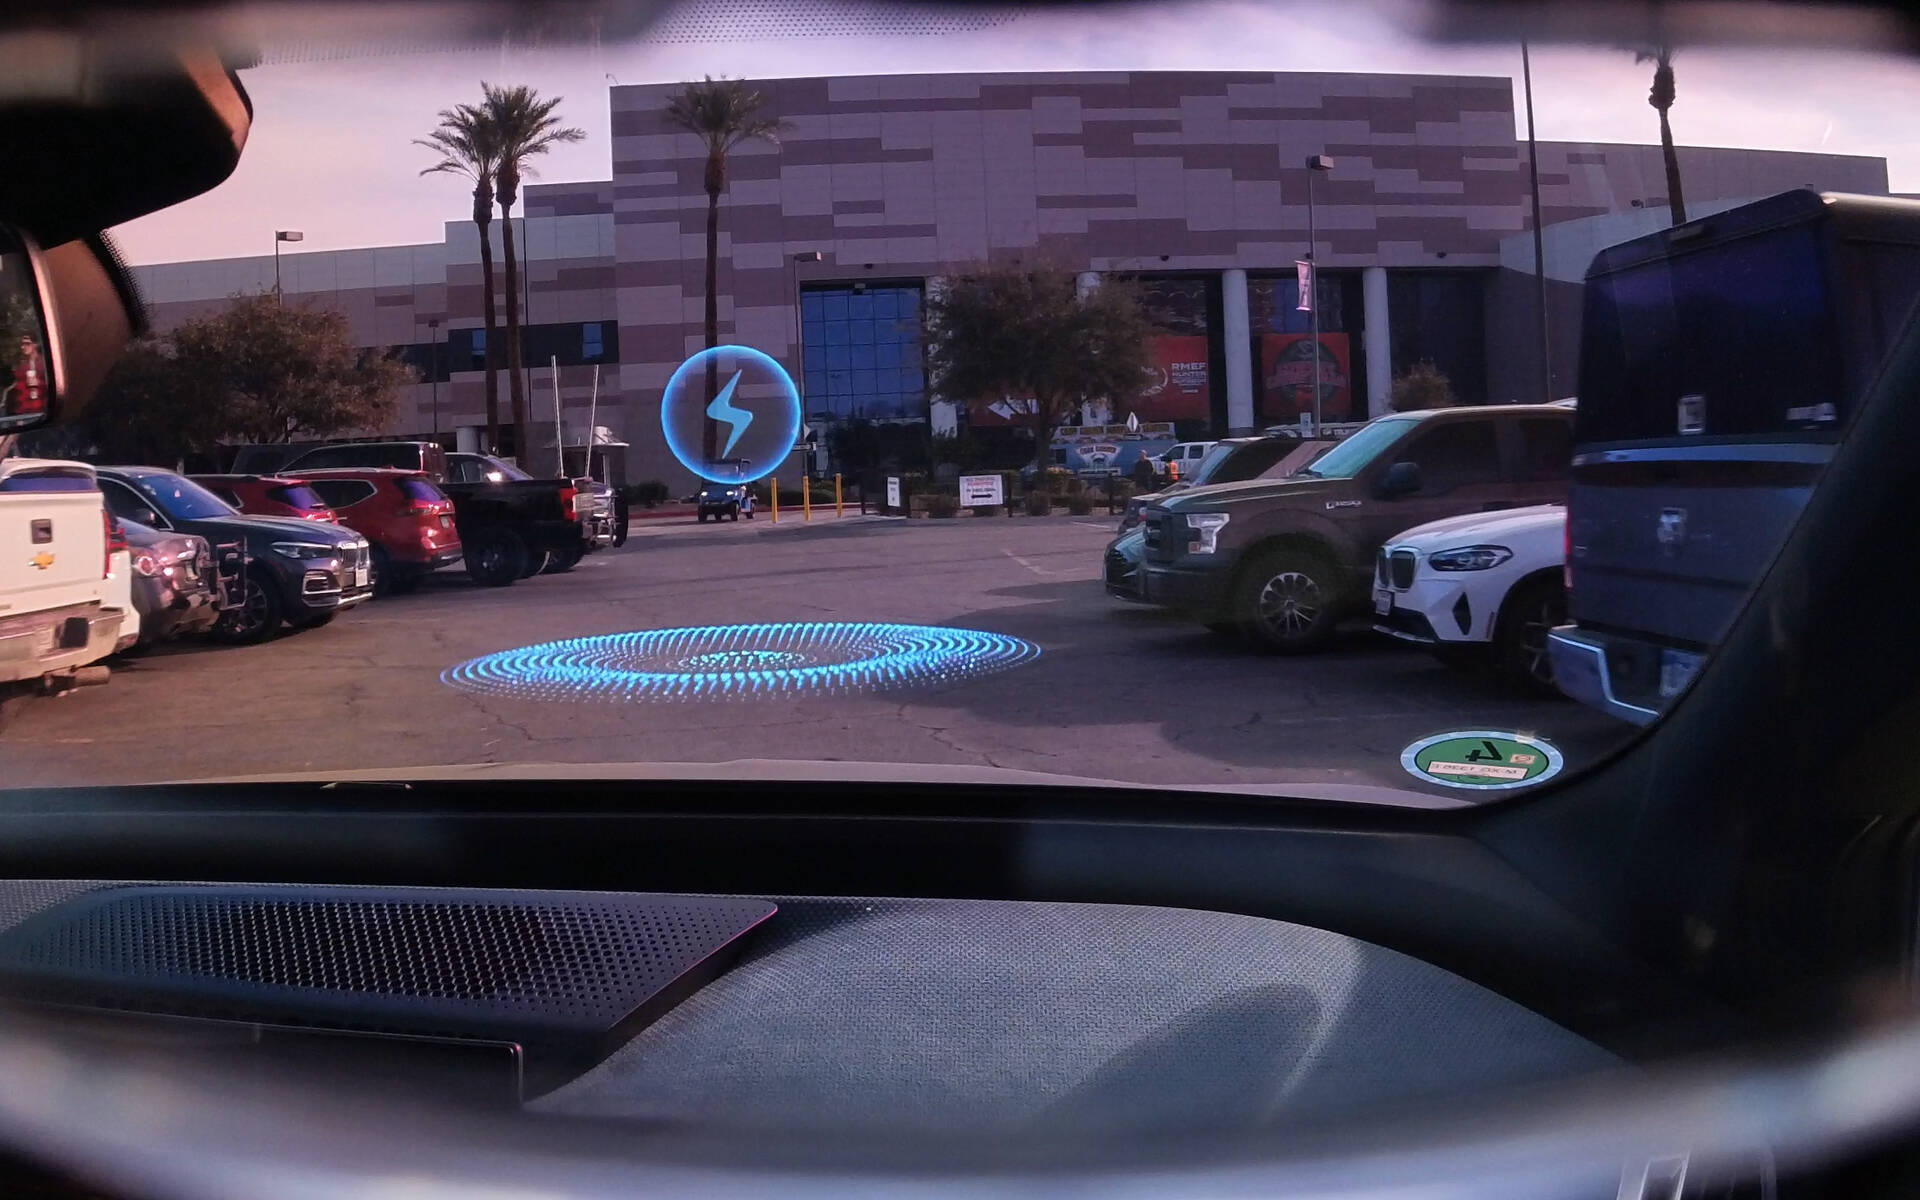 This heads-up display for your car comes equipped with 's Alexa